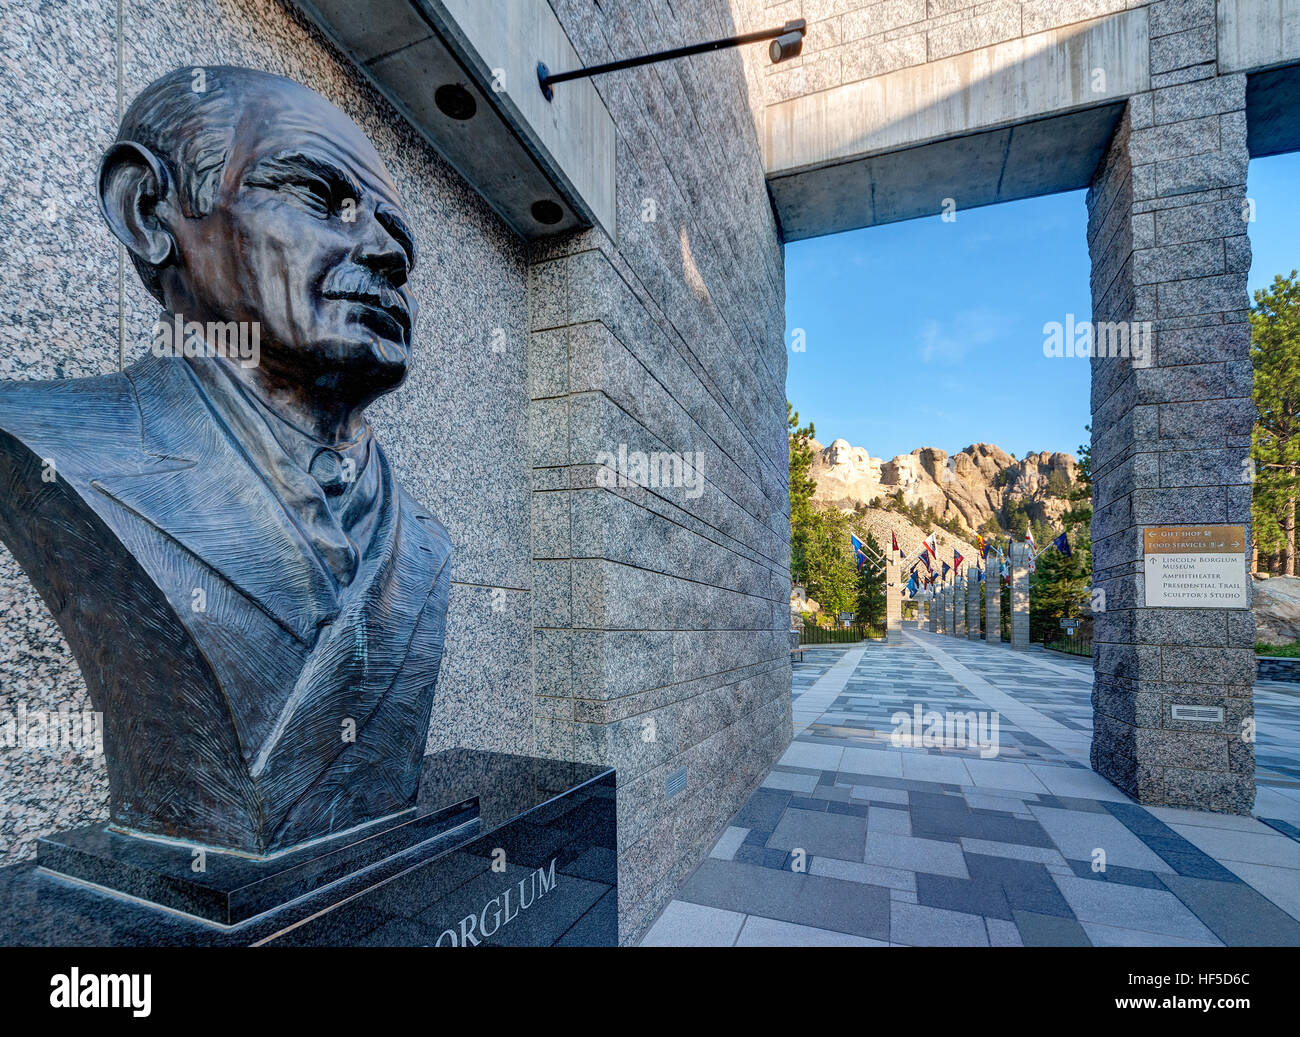 Mount Rushmore National Memorial Visitor's Center with portrait bust of Gutzon Borglum sculptor of Mt Rushmore, visible in the distance. Stock Photo